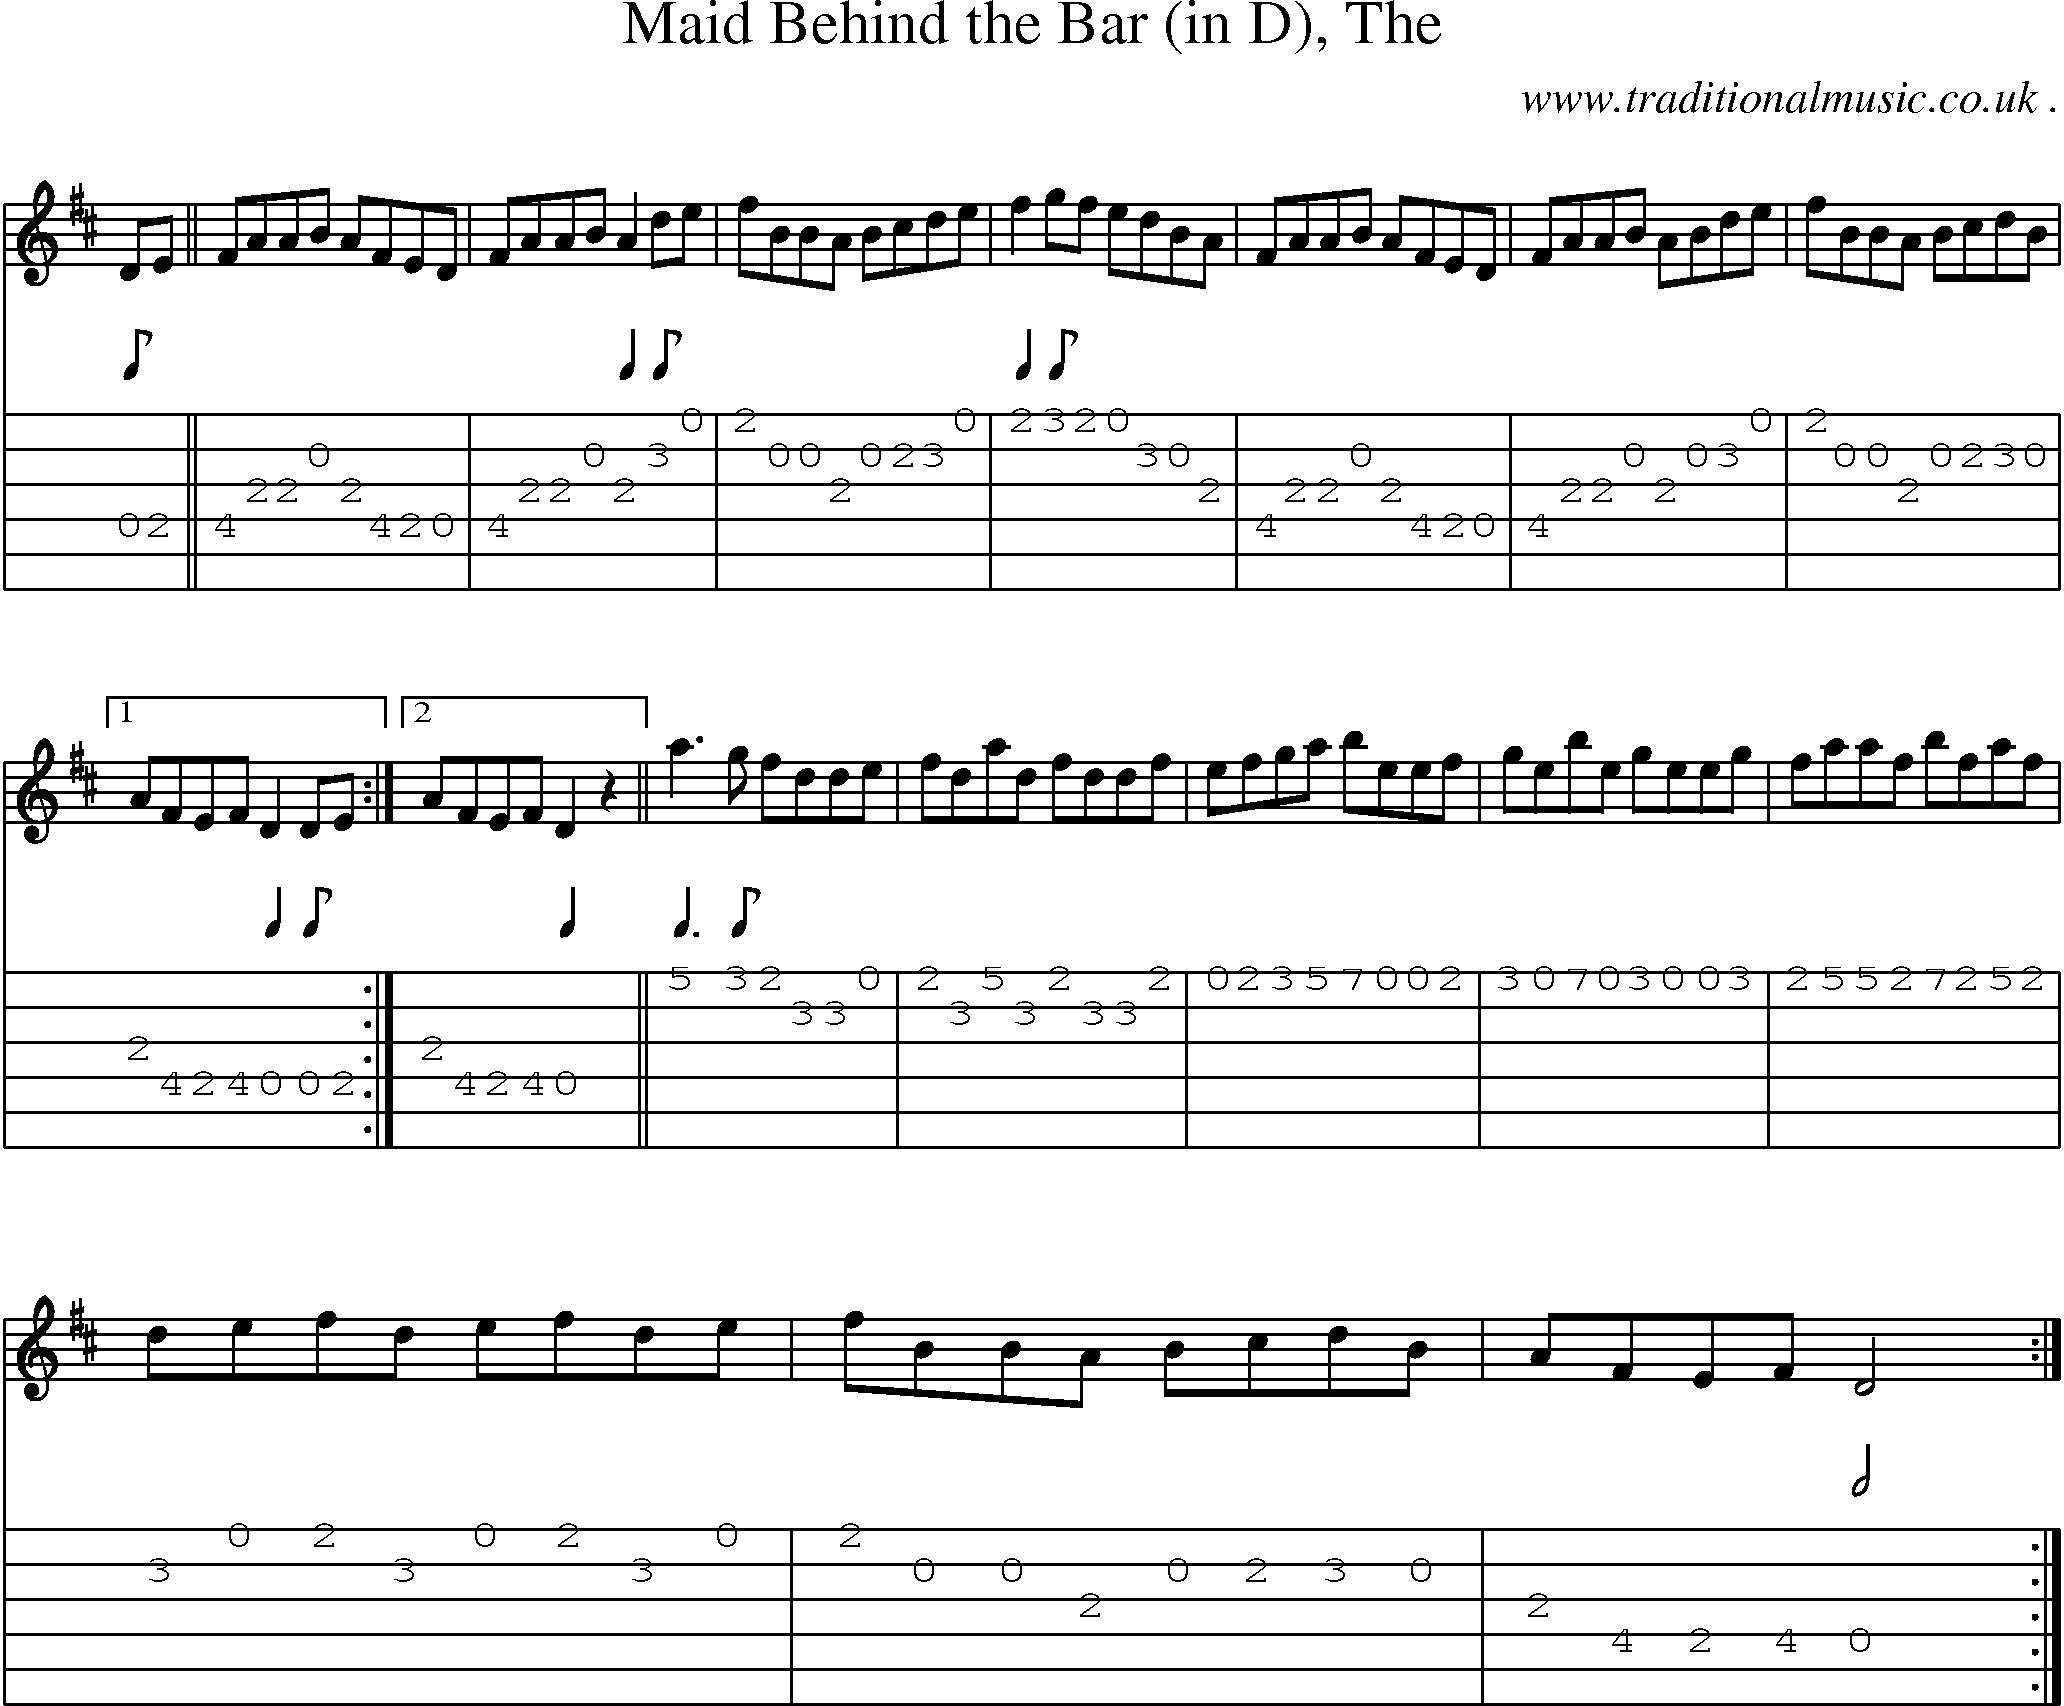 Sheet-music  score, Chords and Guitar Tabs for Maid Behind The Bar In D The